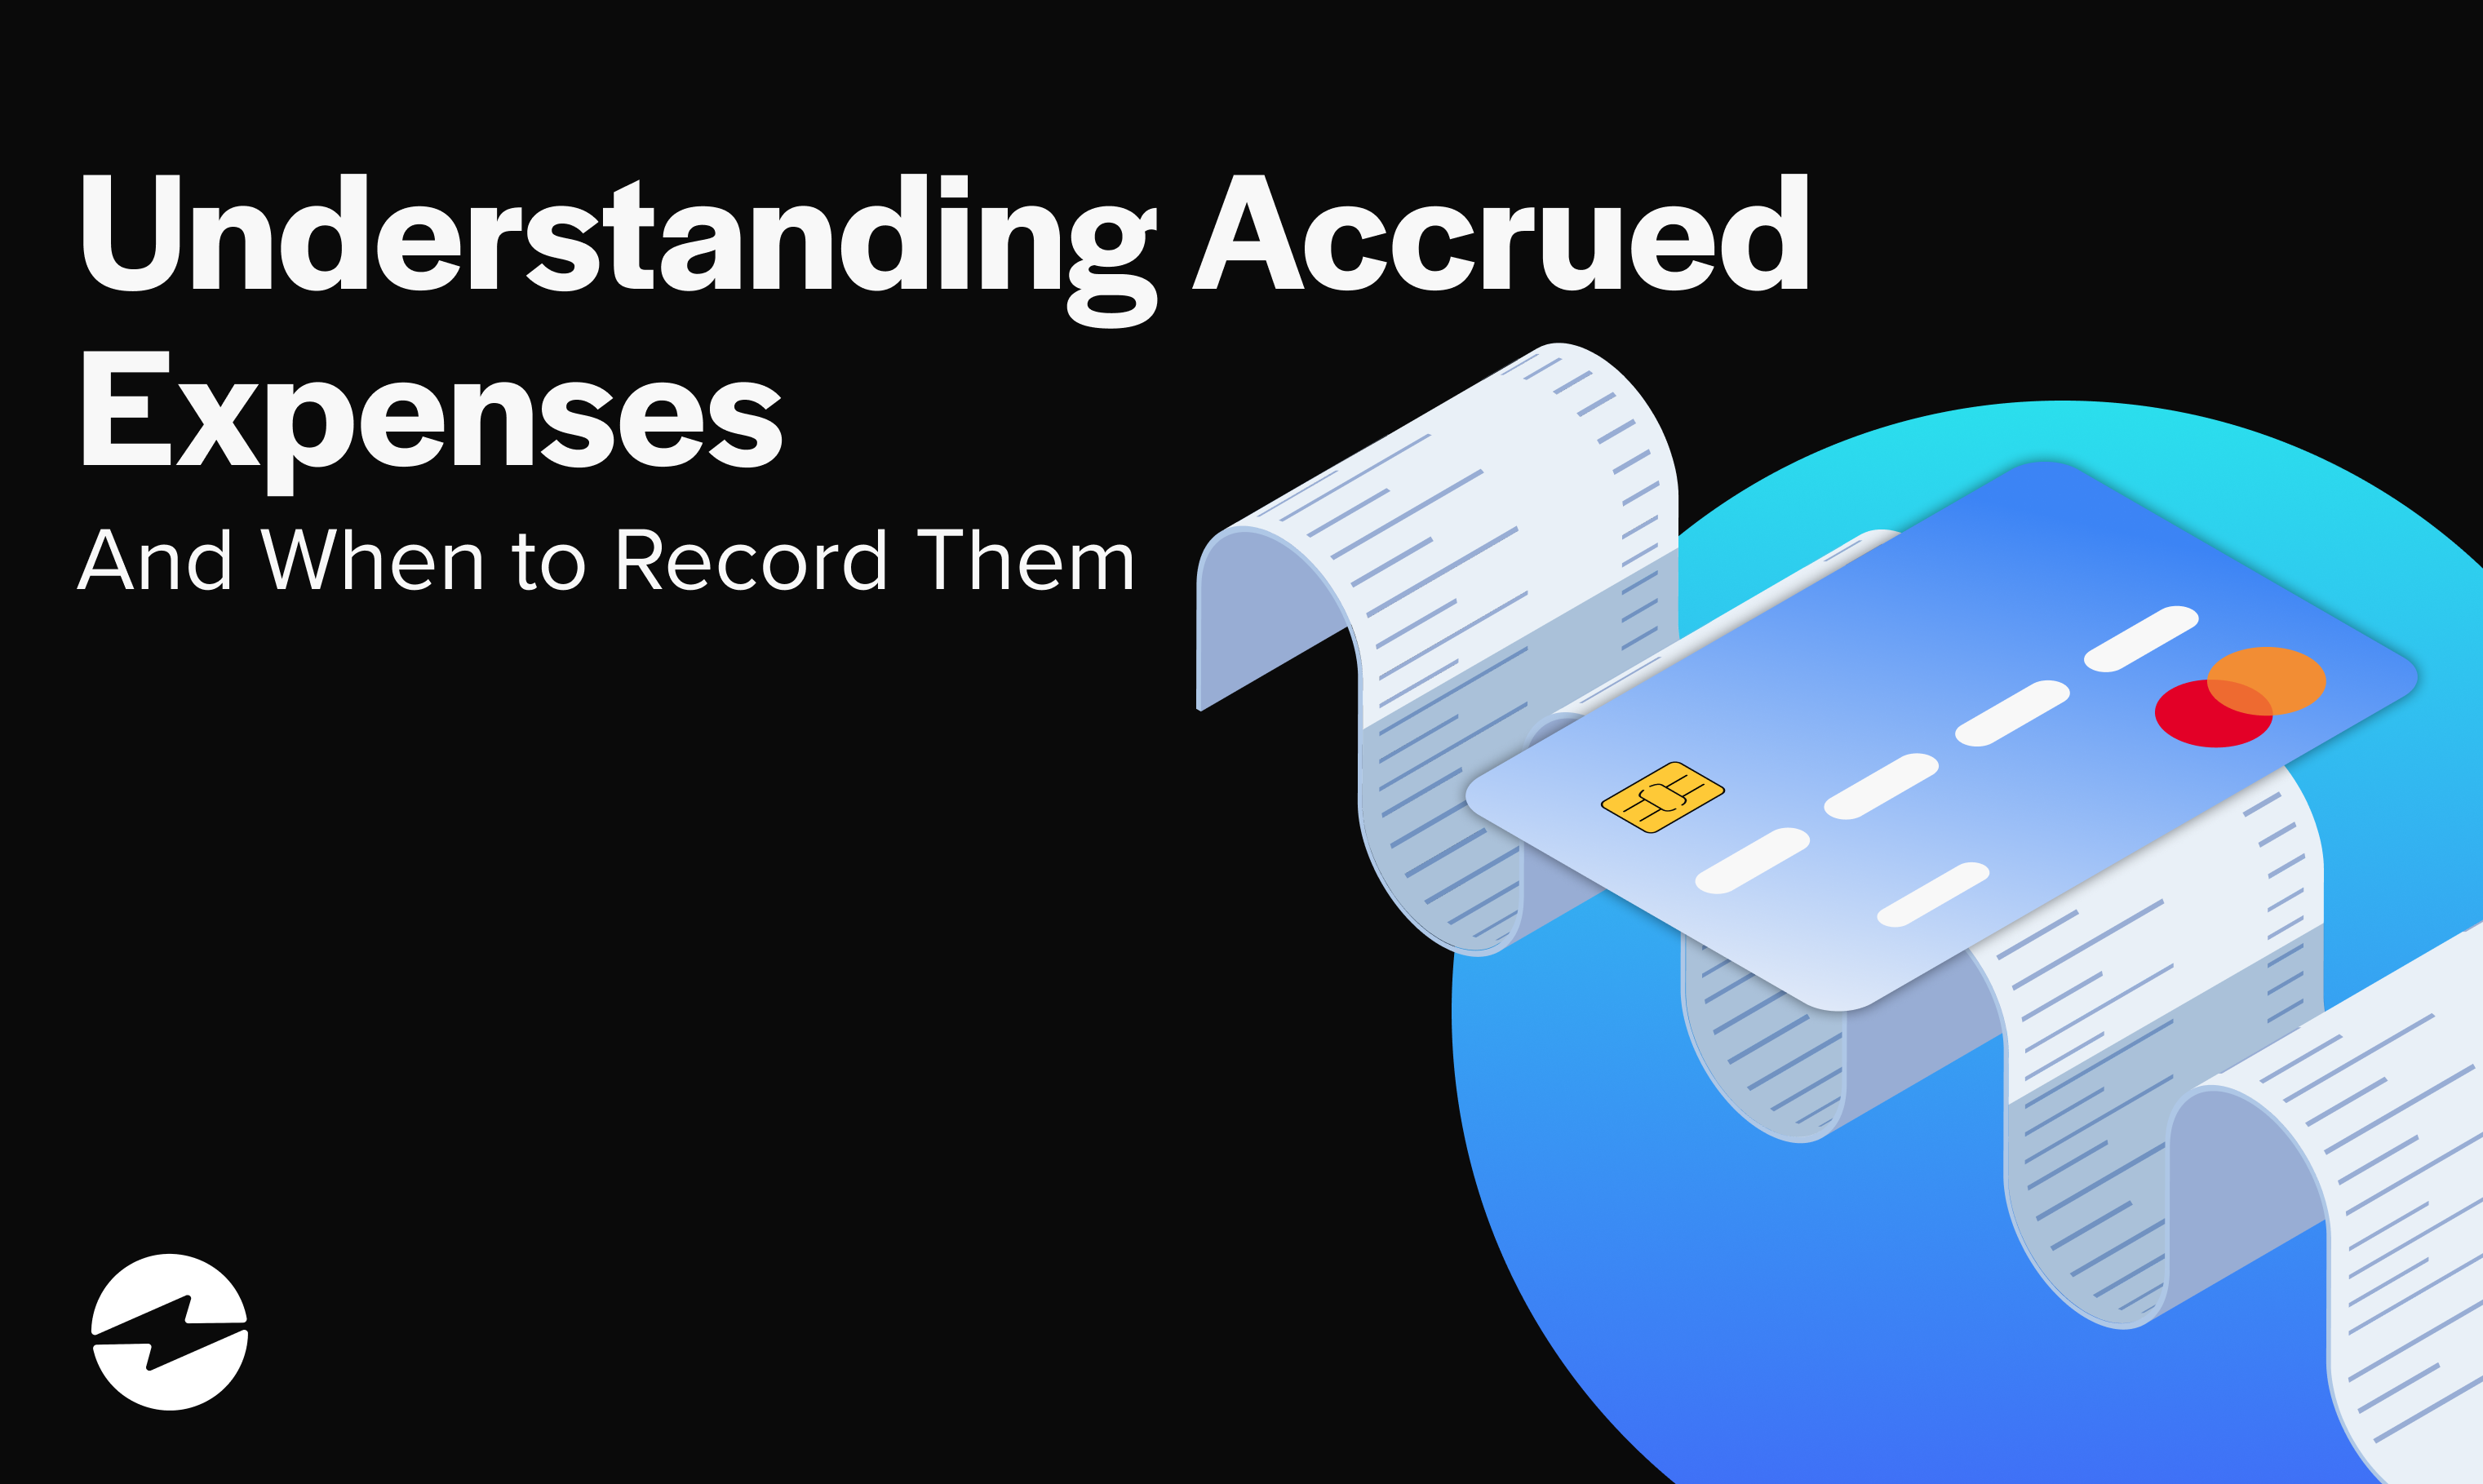 Understanding Accrued Expenses And When to Record Them